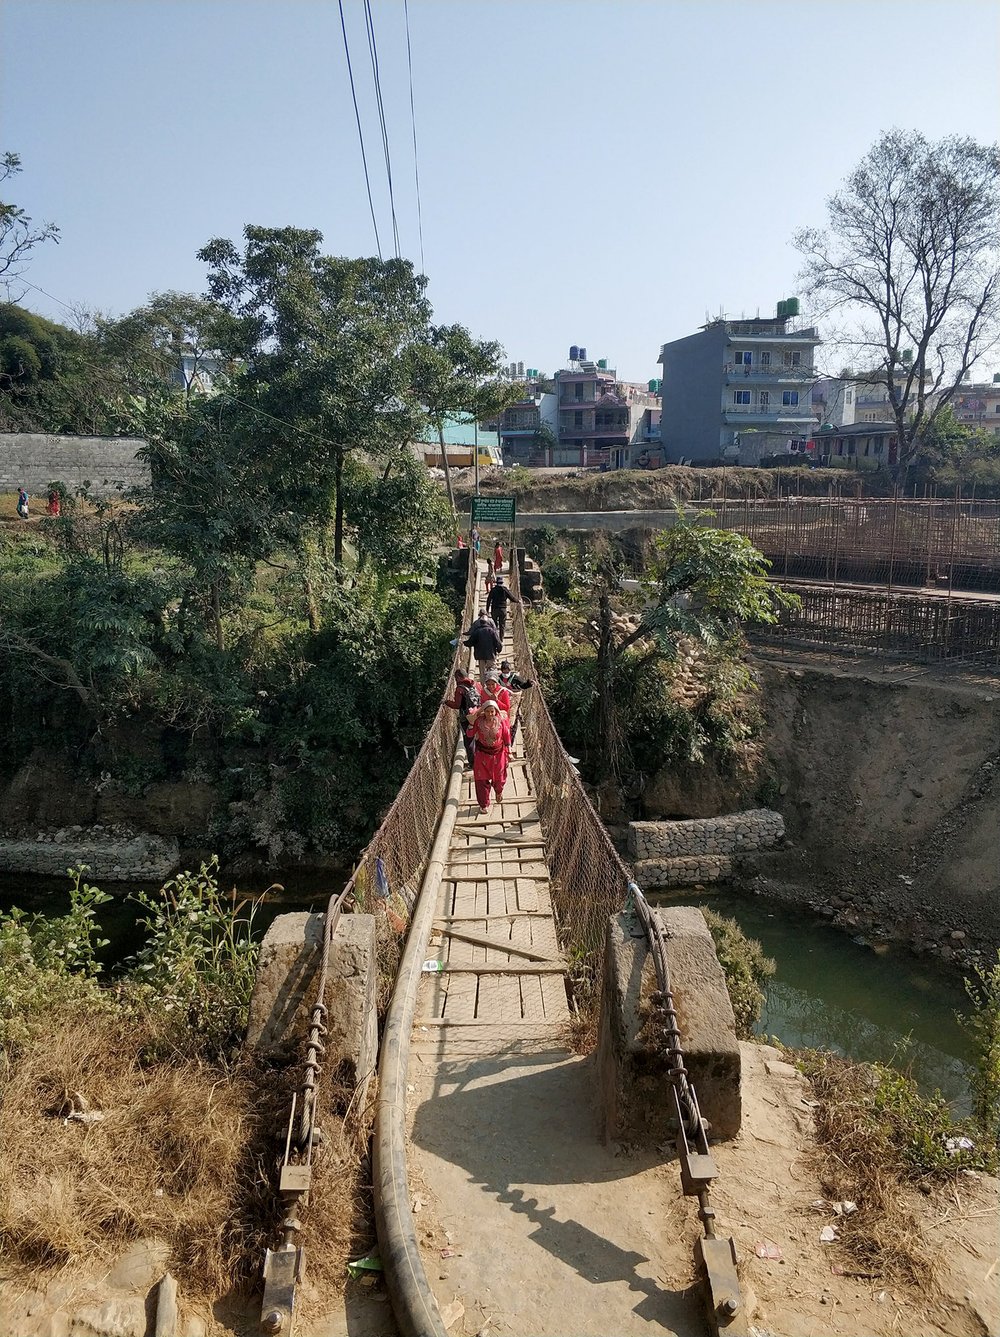  Of course, for locals this is totally normal - and, full disclosure, they're currently building a proper bridge next to this one (although it's Nepal, so it's not going to be finished any time soon) 